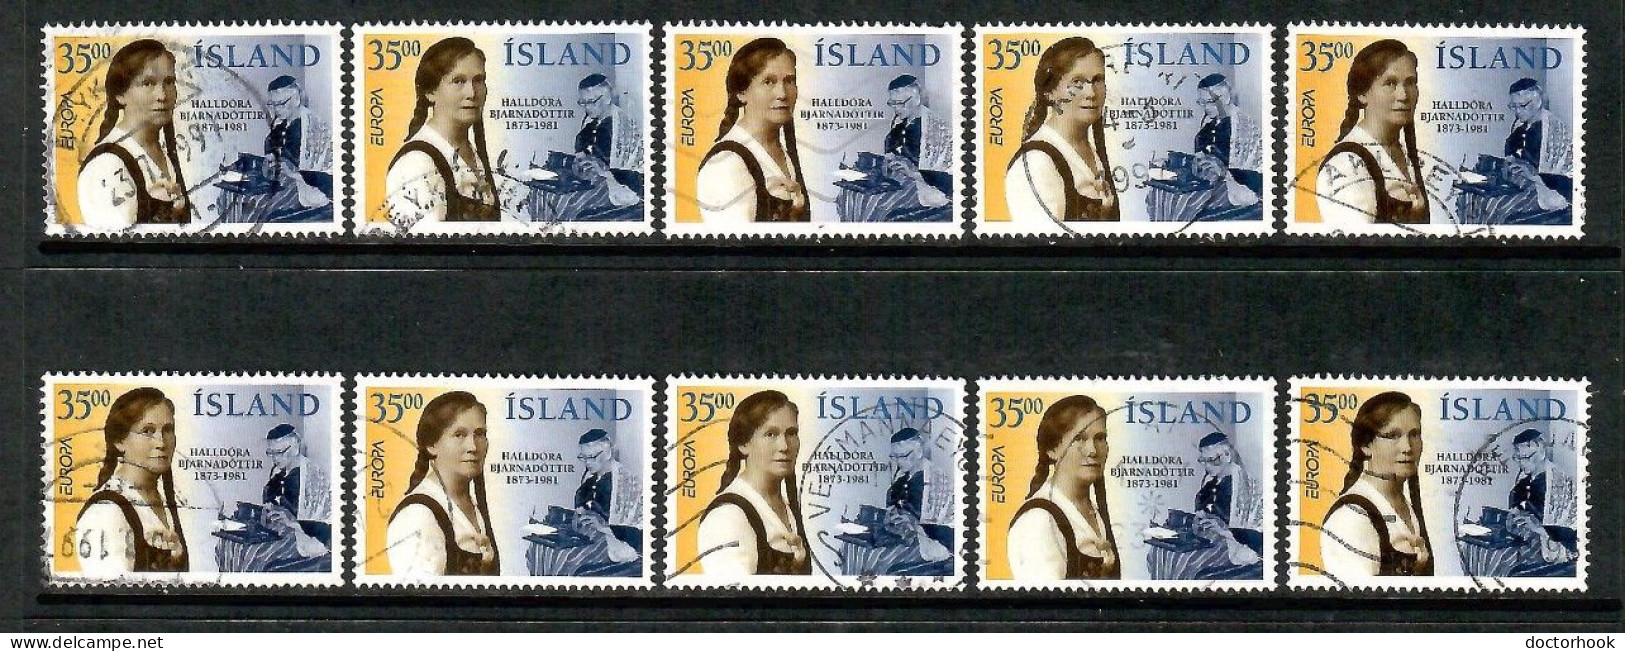 ICELAND   Scott # 818 USED WHOLESALE LOT OF 10 (CONDITION AS PER SCAN) (WH-628) - Colecciones & Series